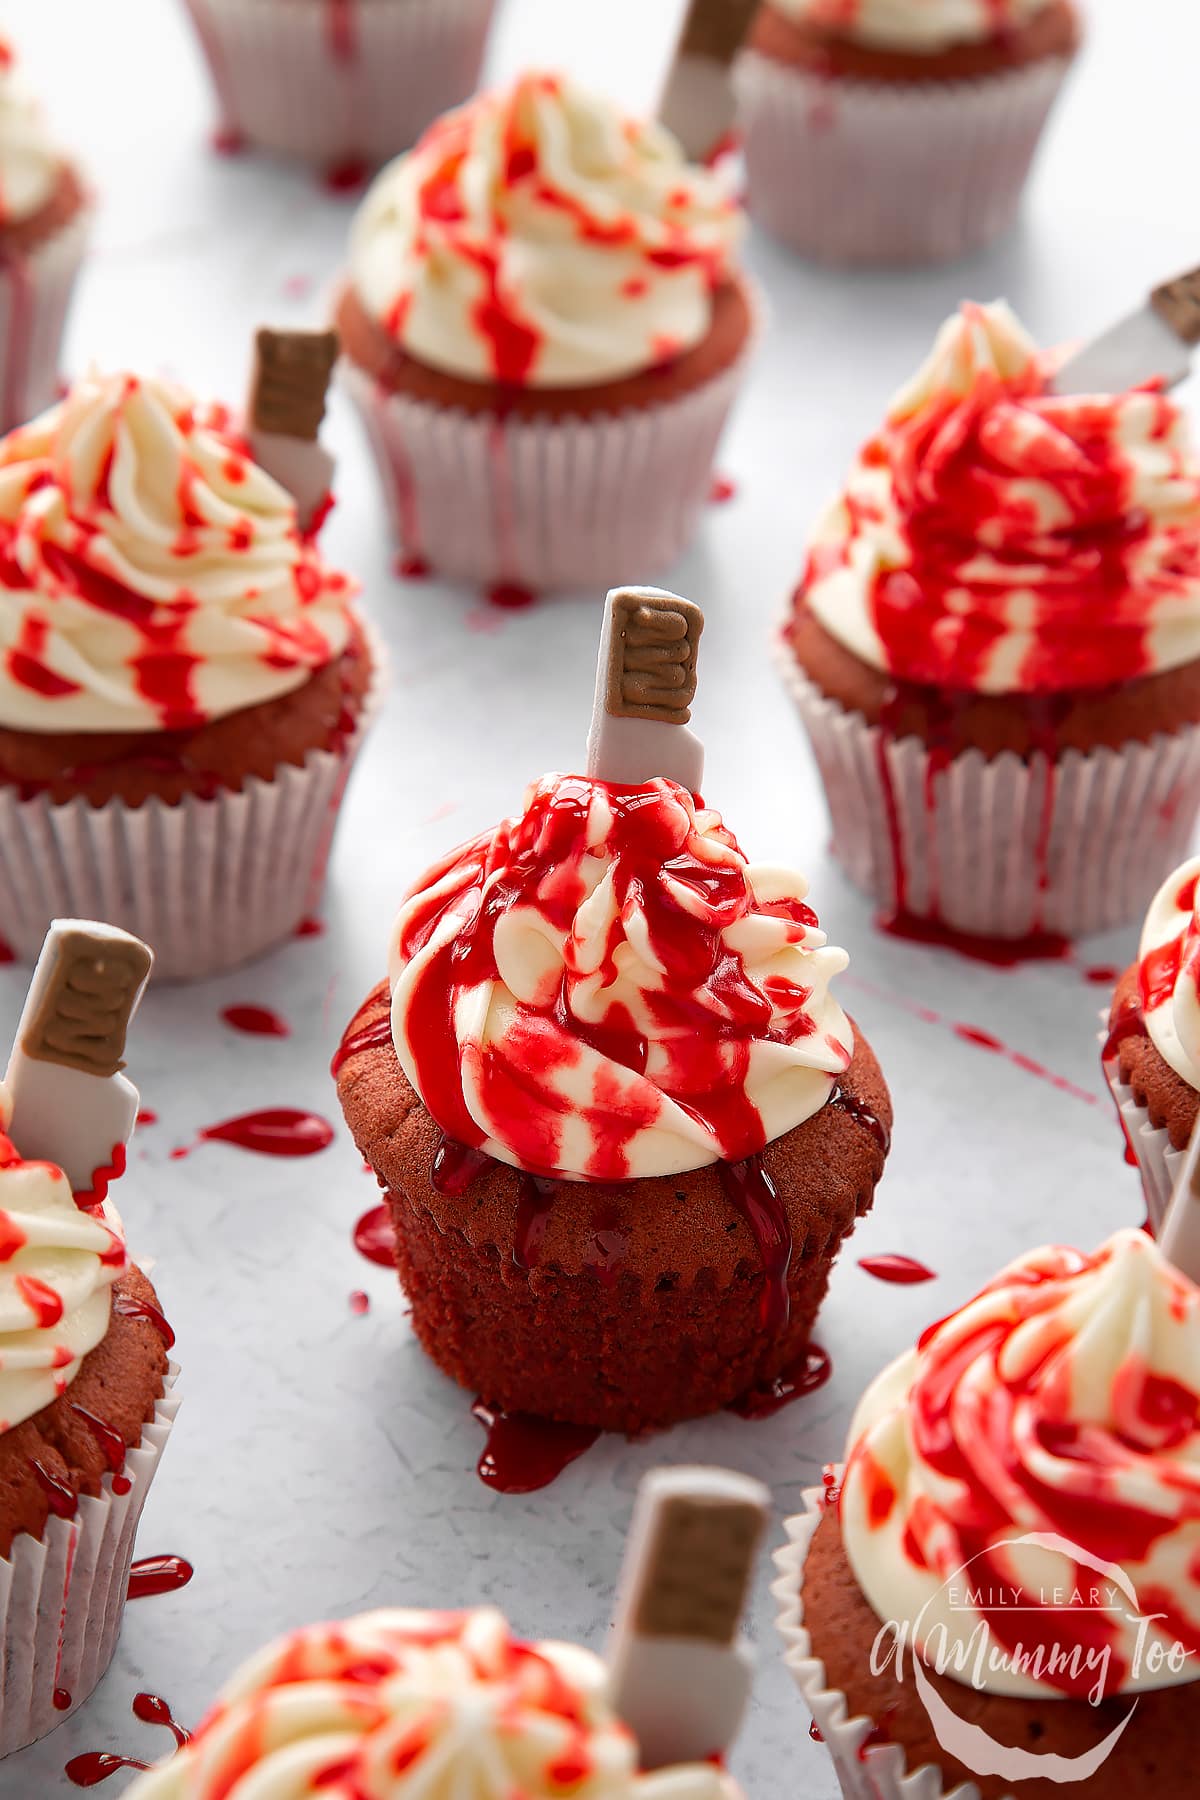 Red velvet Halloween cupcakes, spattered with red syrup. The one in the foreground has been unwrapped.